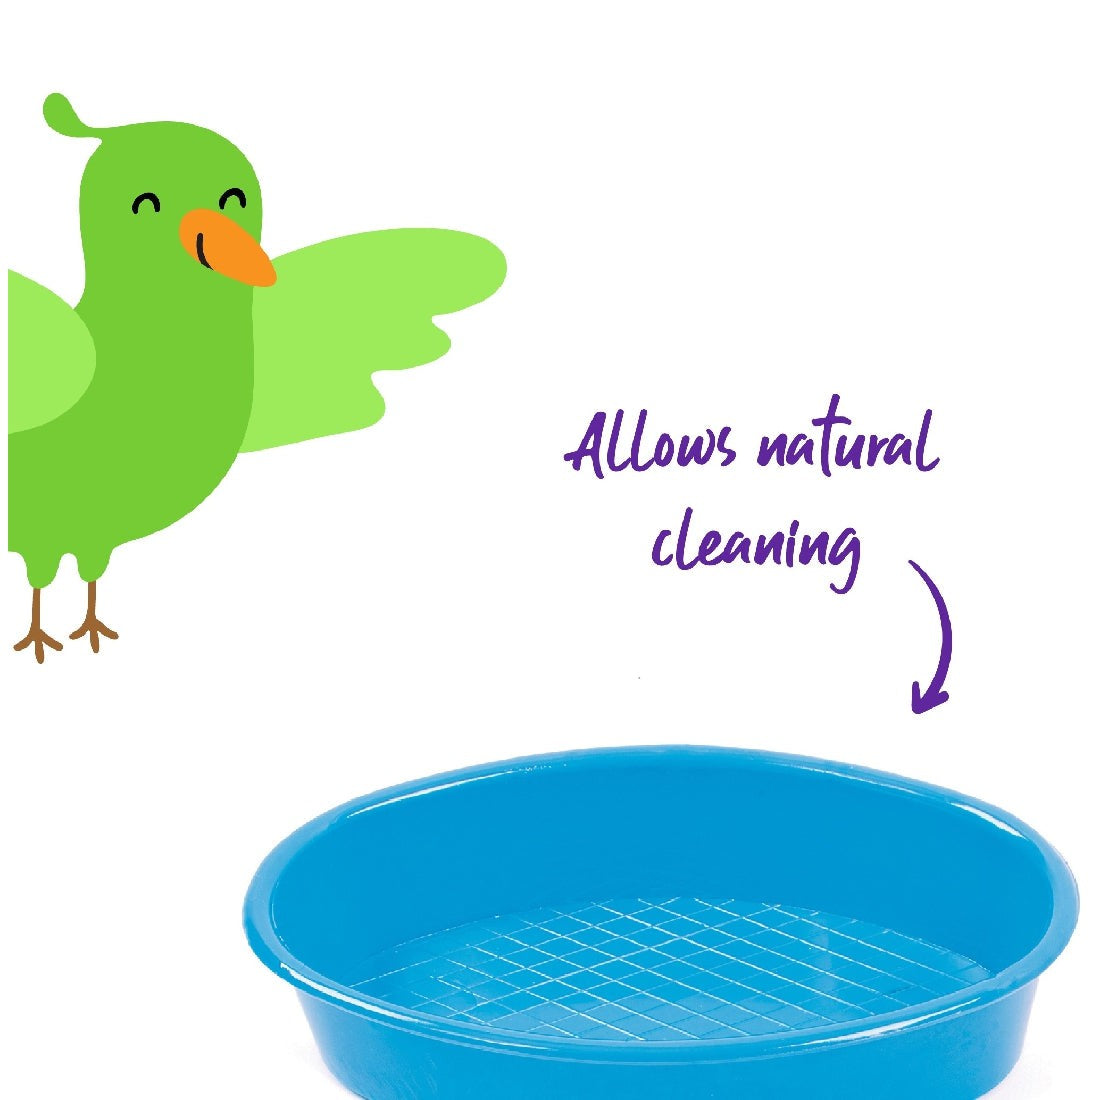 Green cartoon bird toy next to blue bowl with text "Allows natural cleaning".